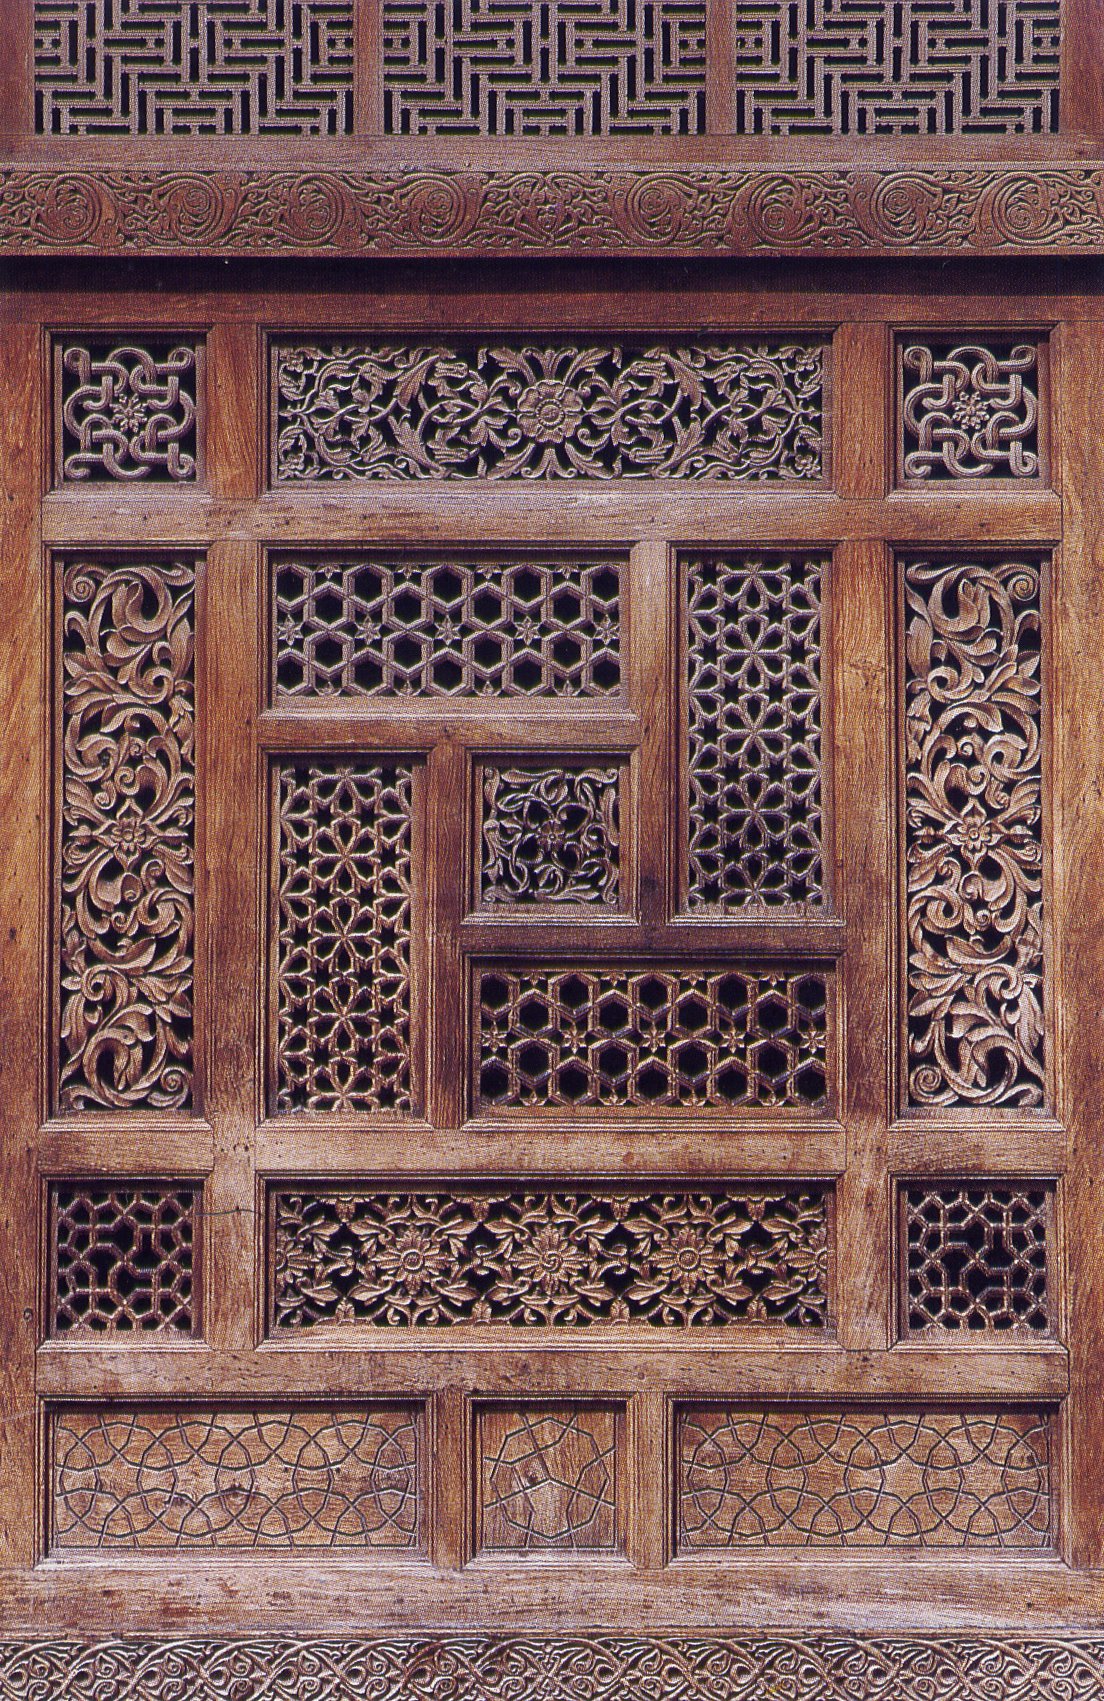 ISLAMIC ART AND ARCHITECTURE – PATTERN, LIGHT AND  